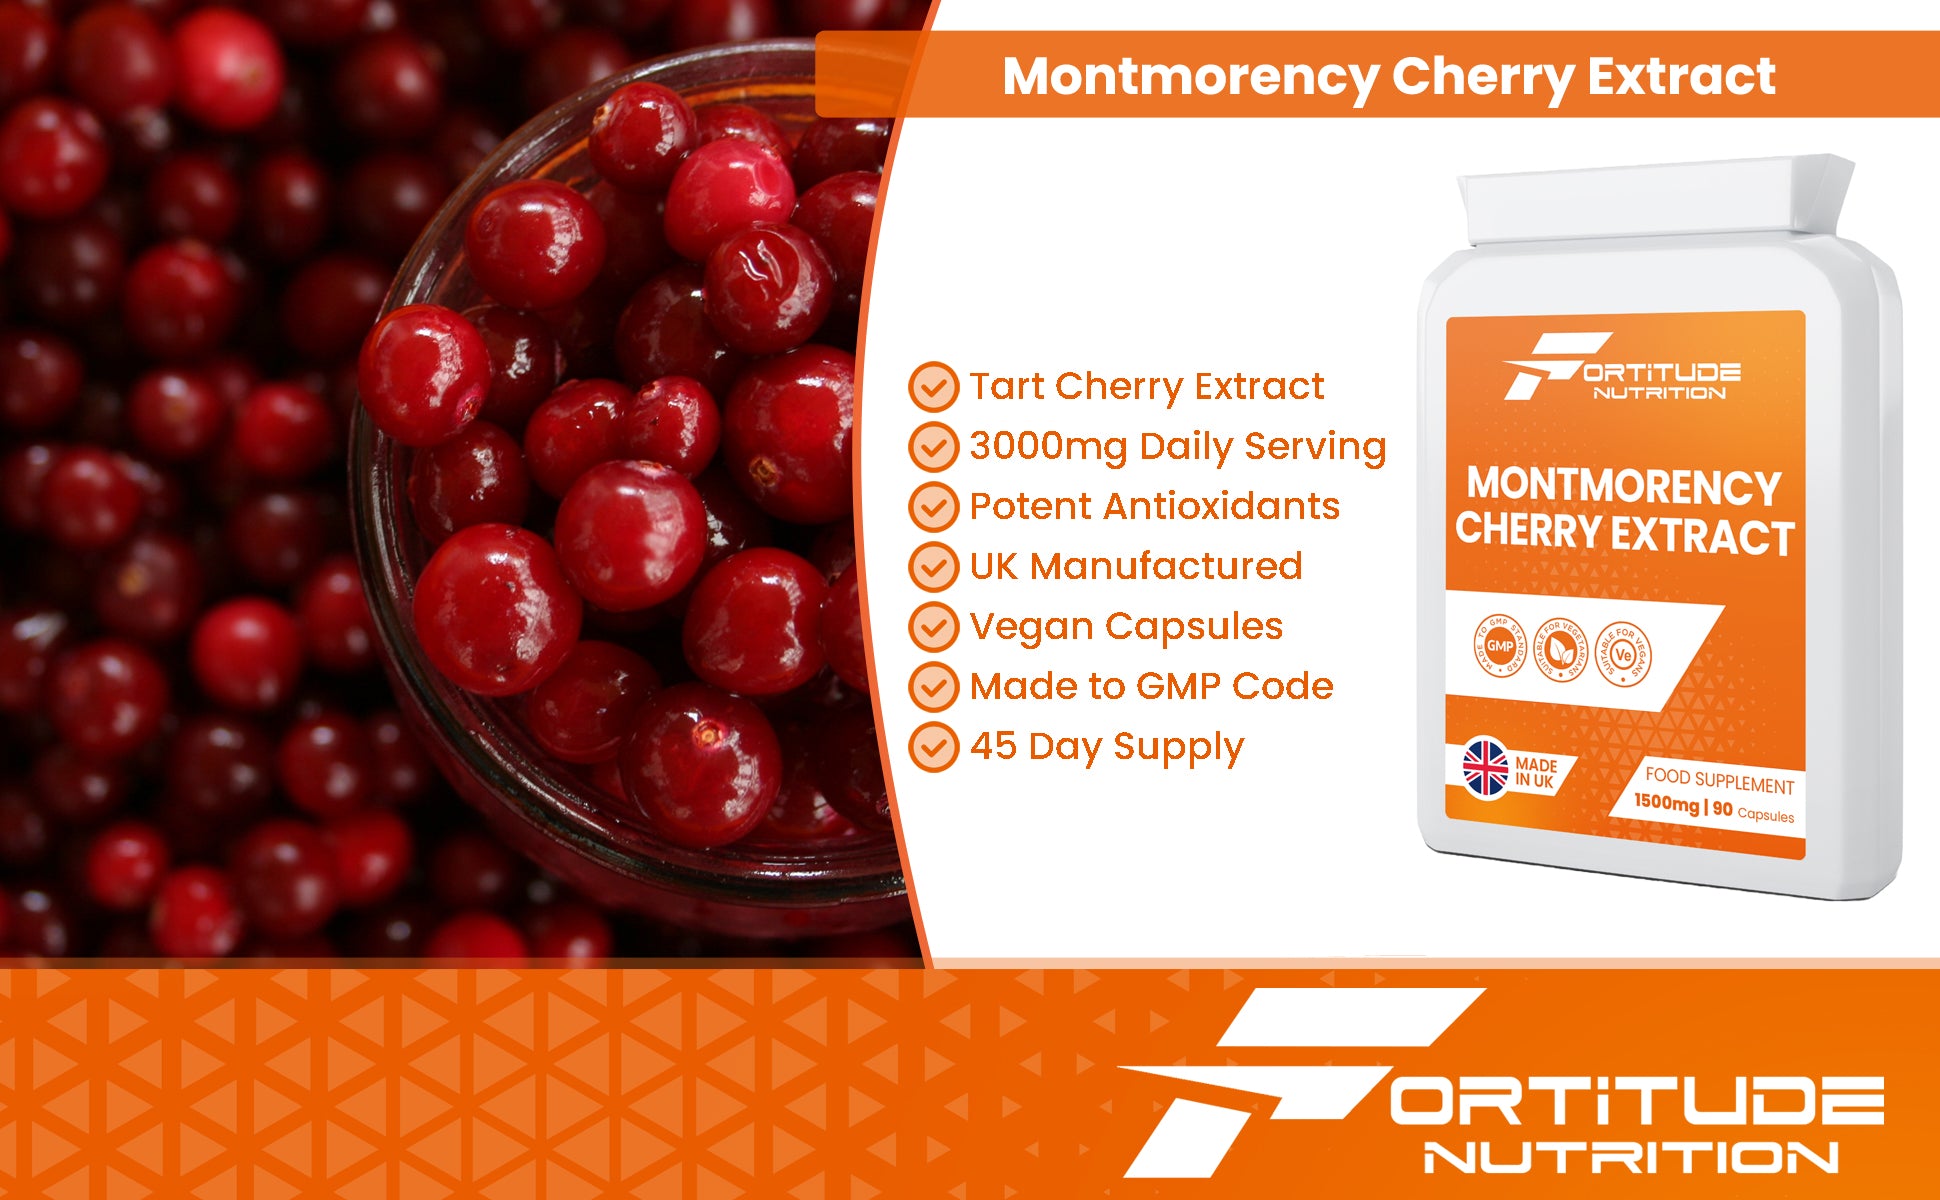 Fortitude Nutrition Montmorency Cherry Extract